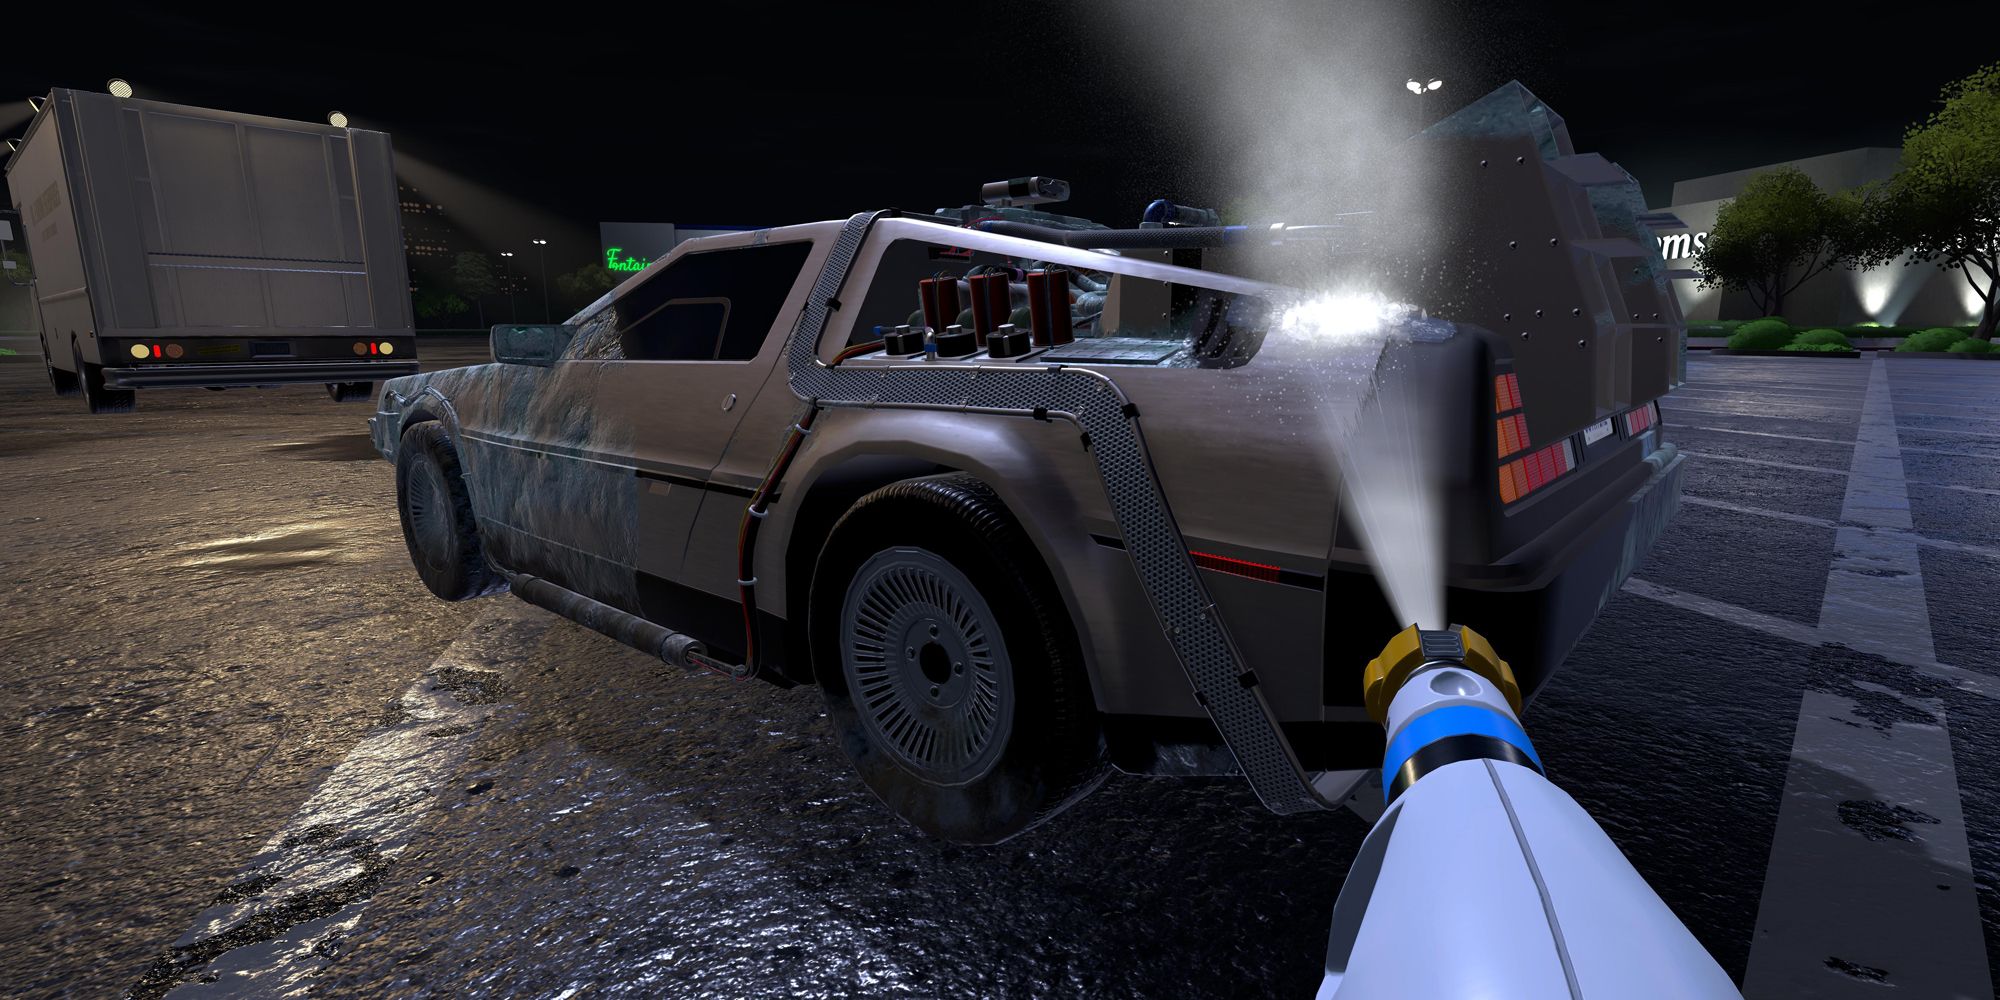 PowerWash Simulator Back to the Future DLC will let you clean DeLorean